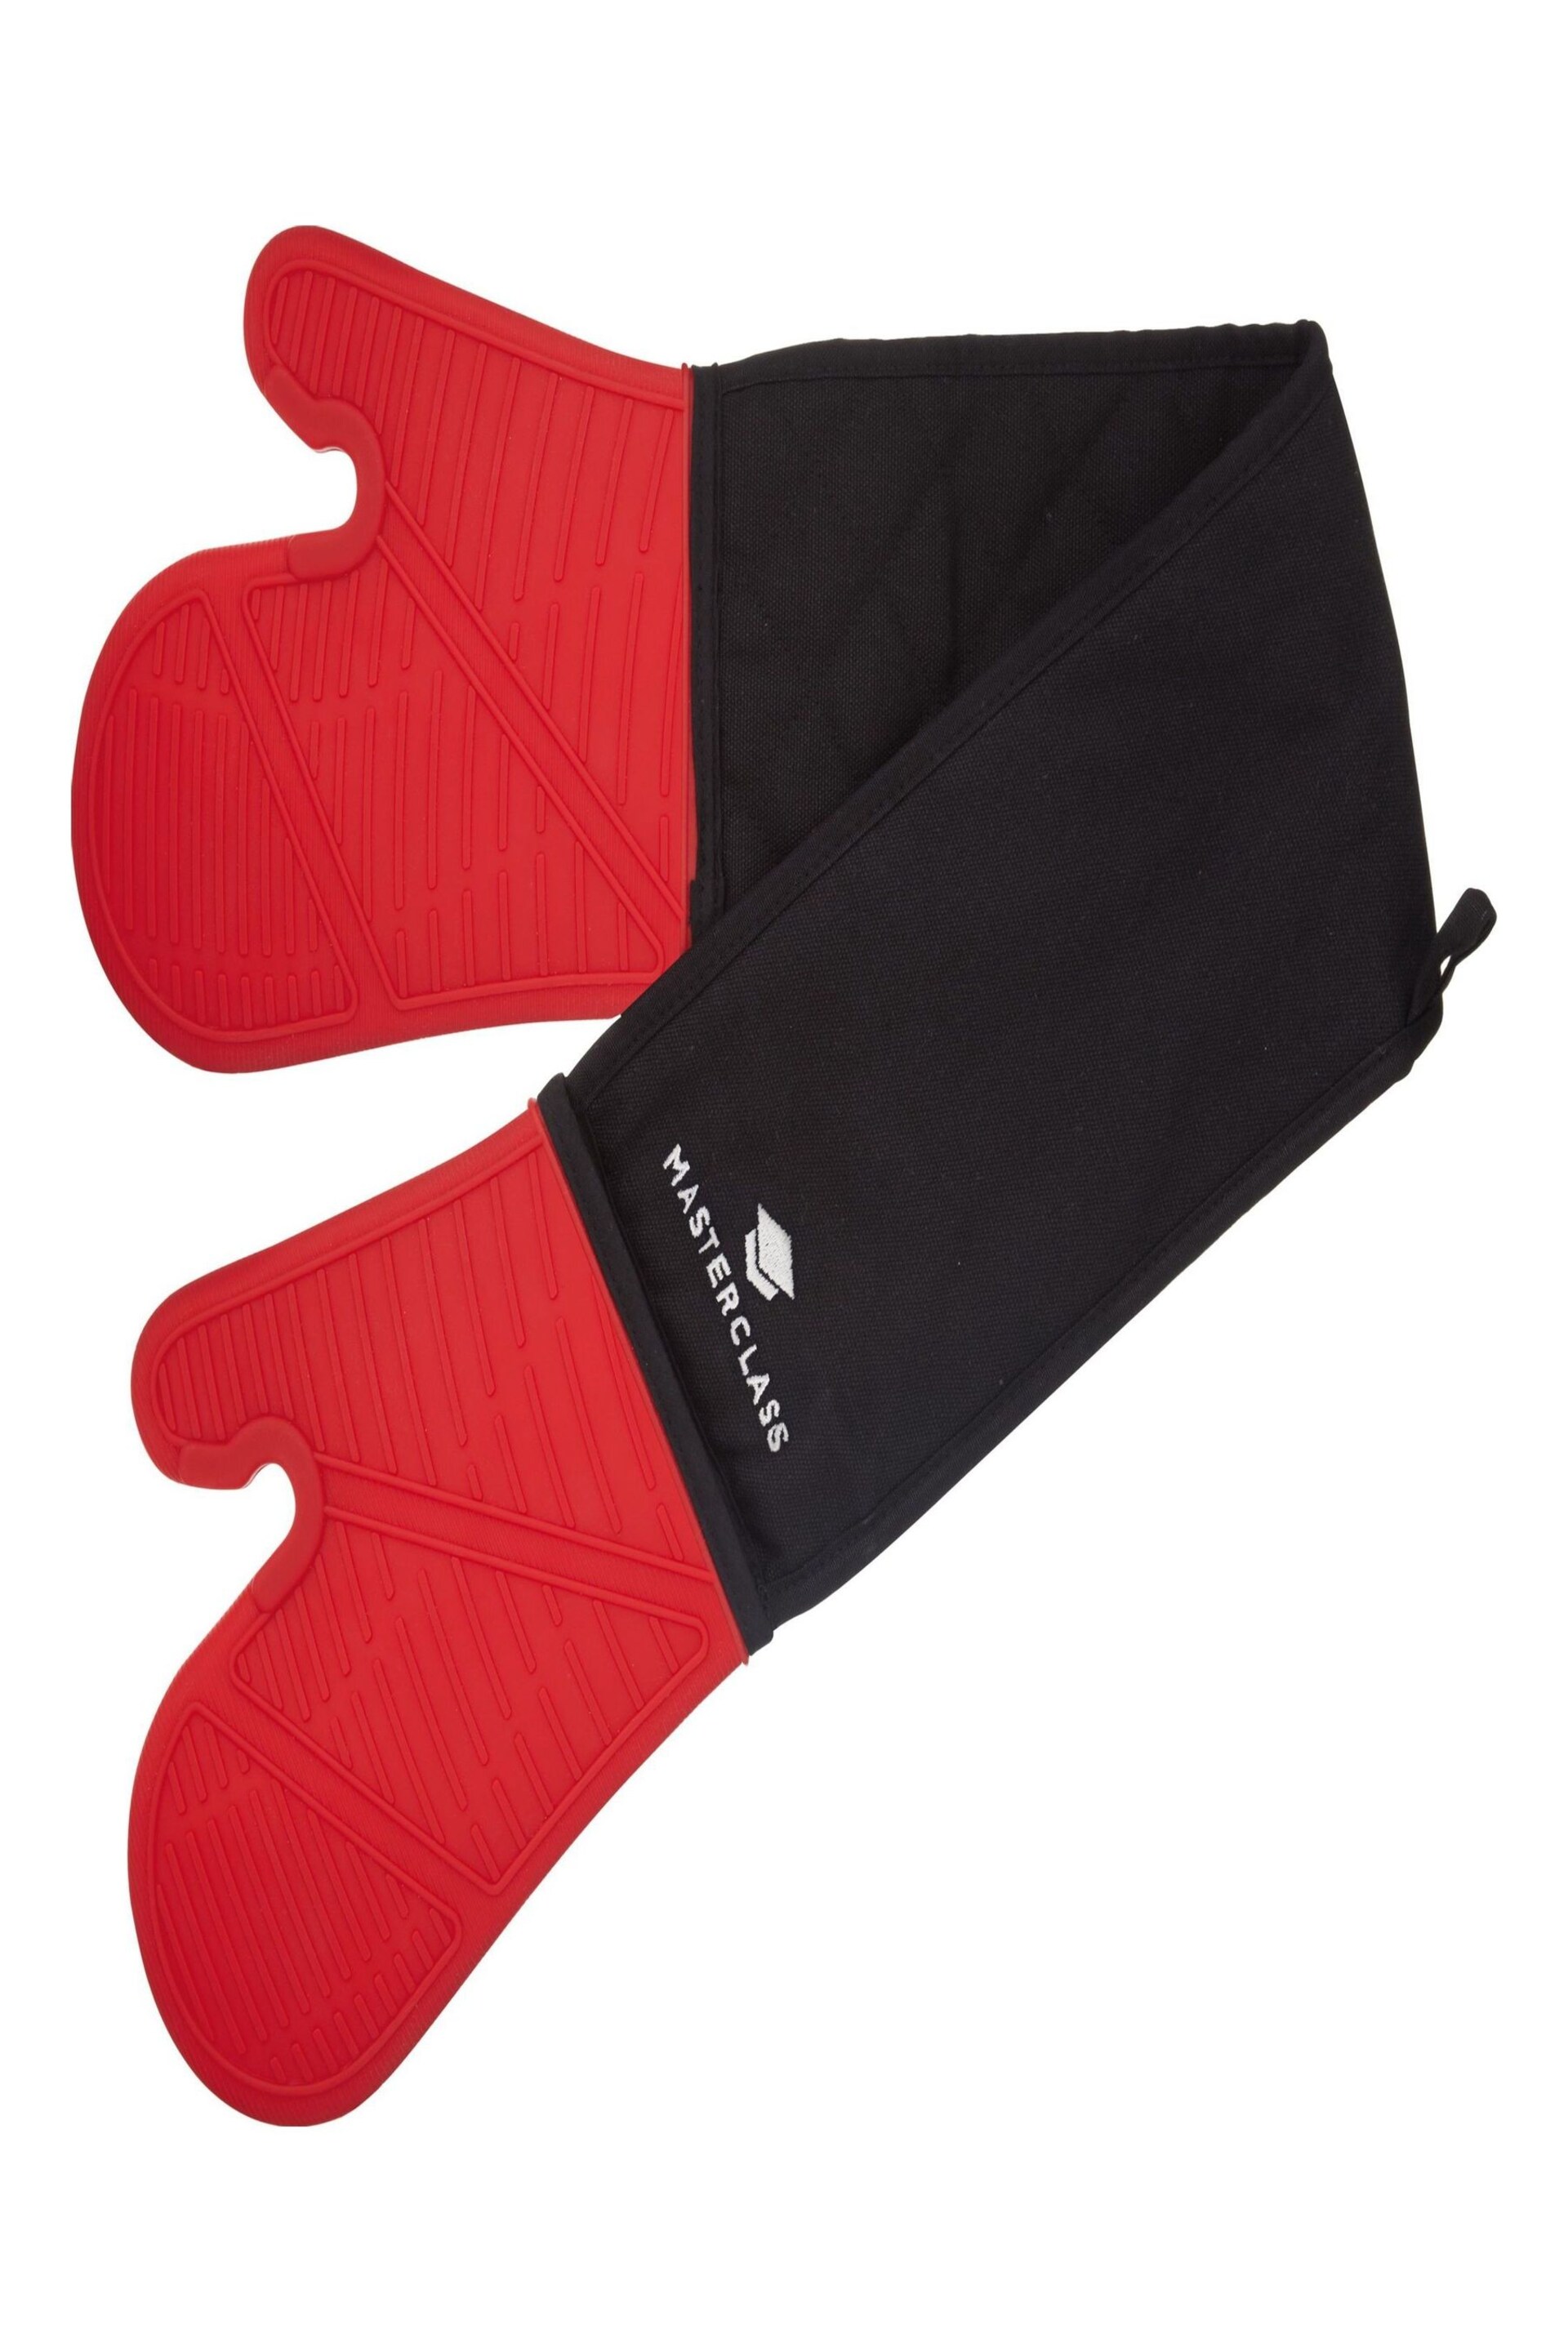 Masterclass Red Seamless Silicone Double Oven Glove - Image 3 of 3